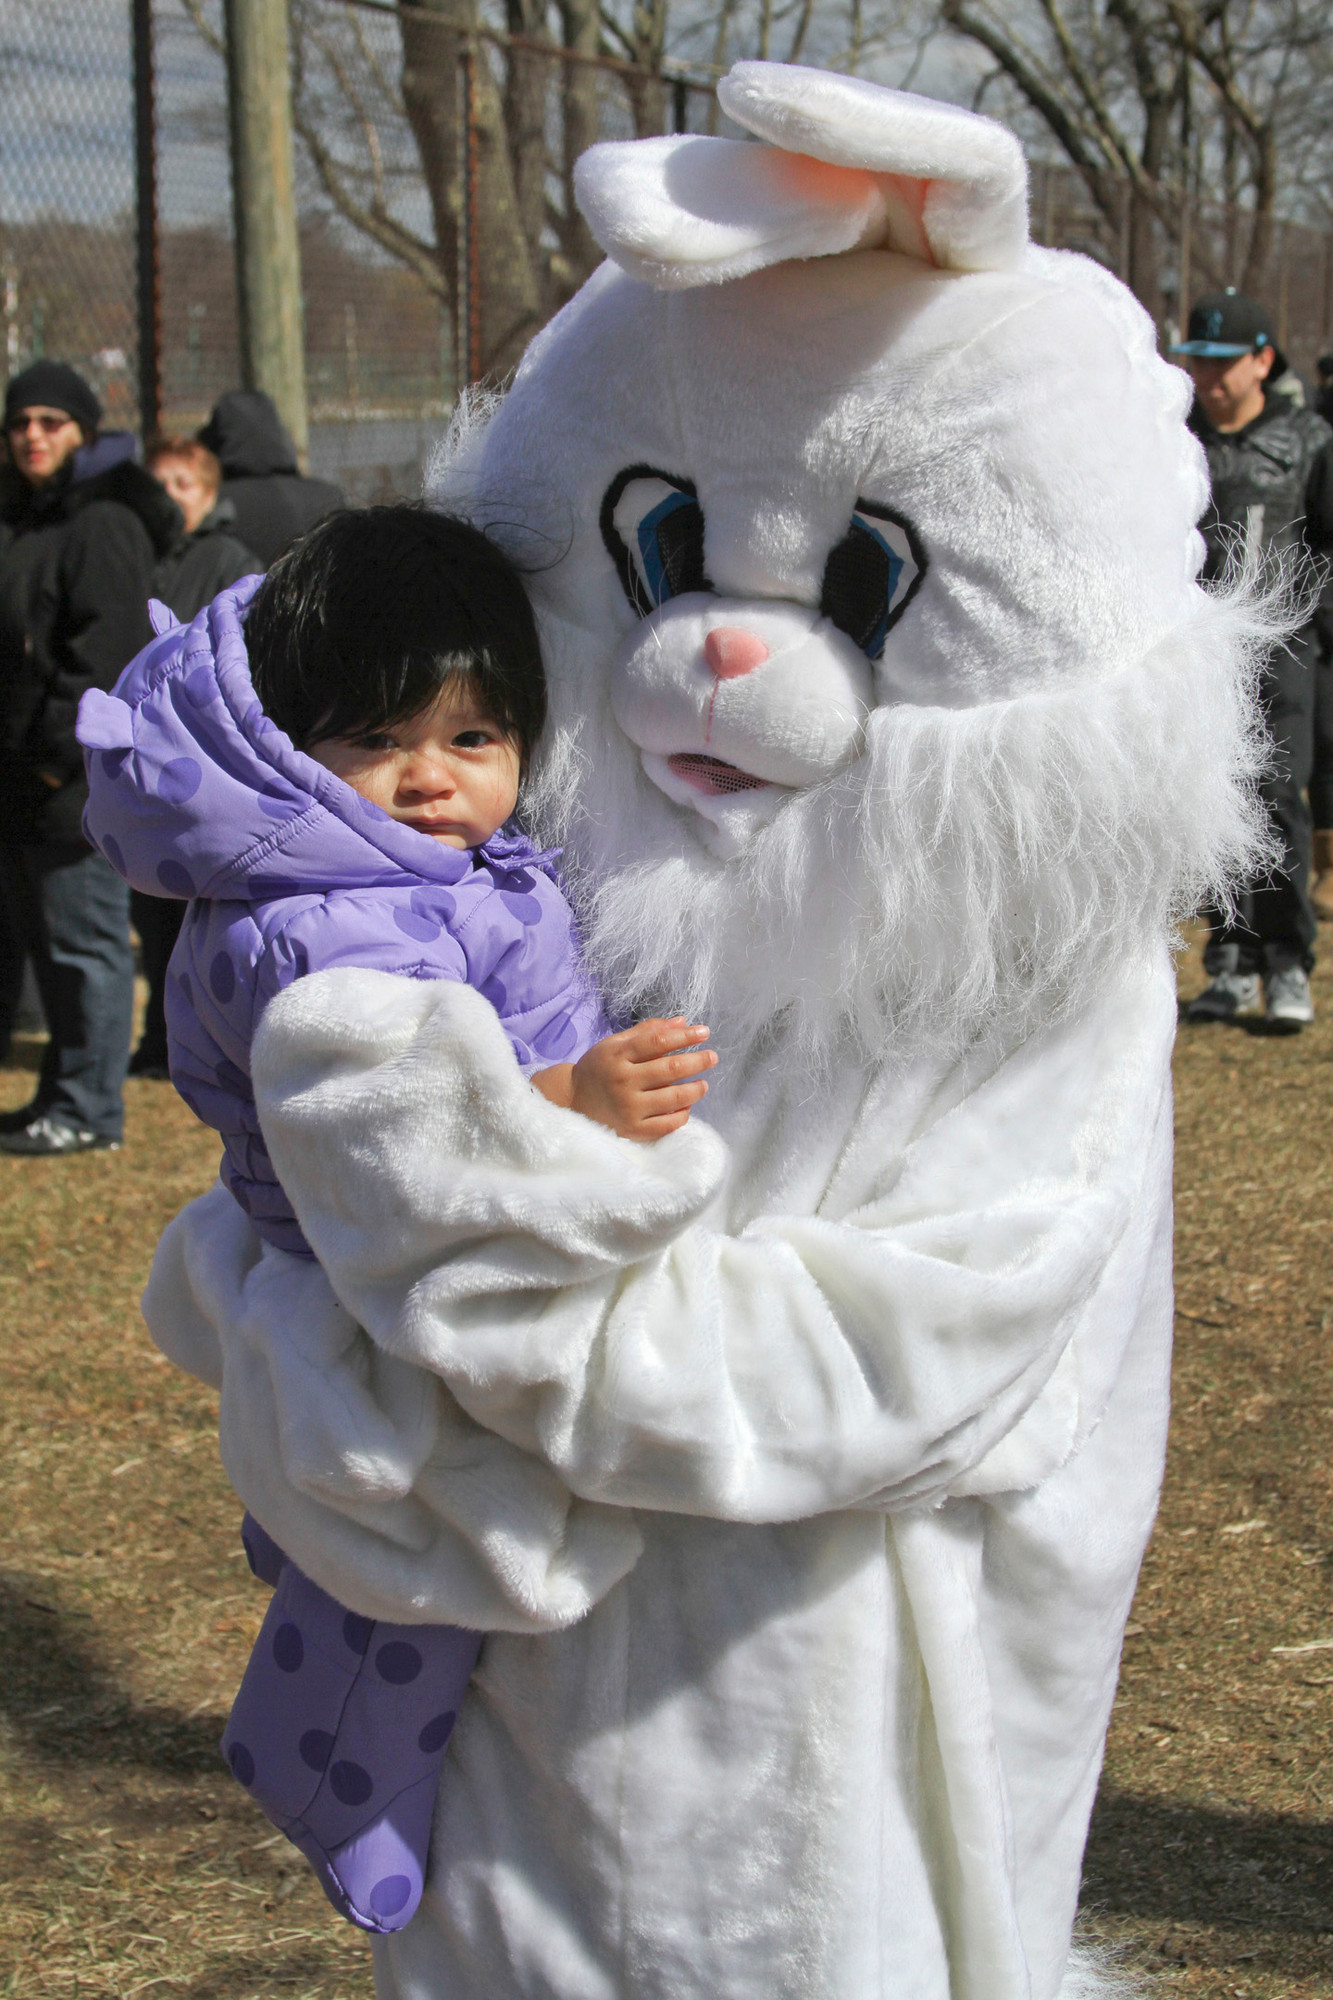 Giselle Torres, 1, got to meet the Easter Bunny on Saturday.